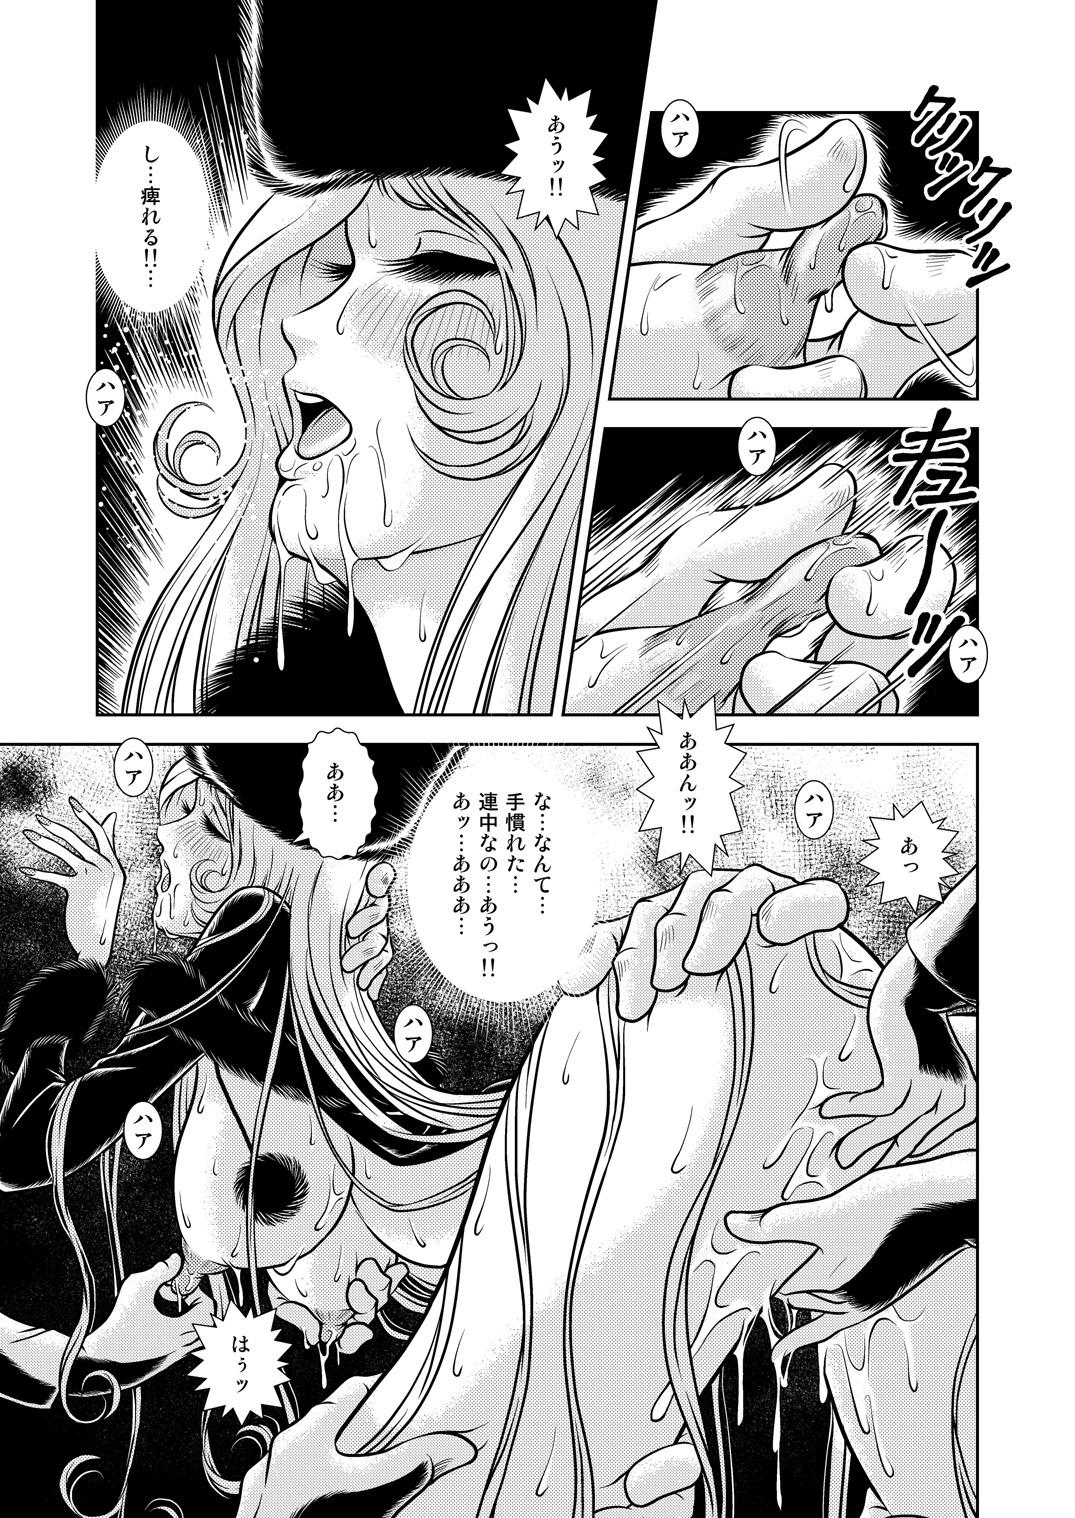 Anal Licking Chikan Tetsudou 999 - Galaxy express 999 Doctor - Page 9